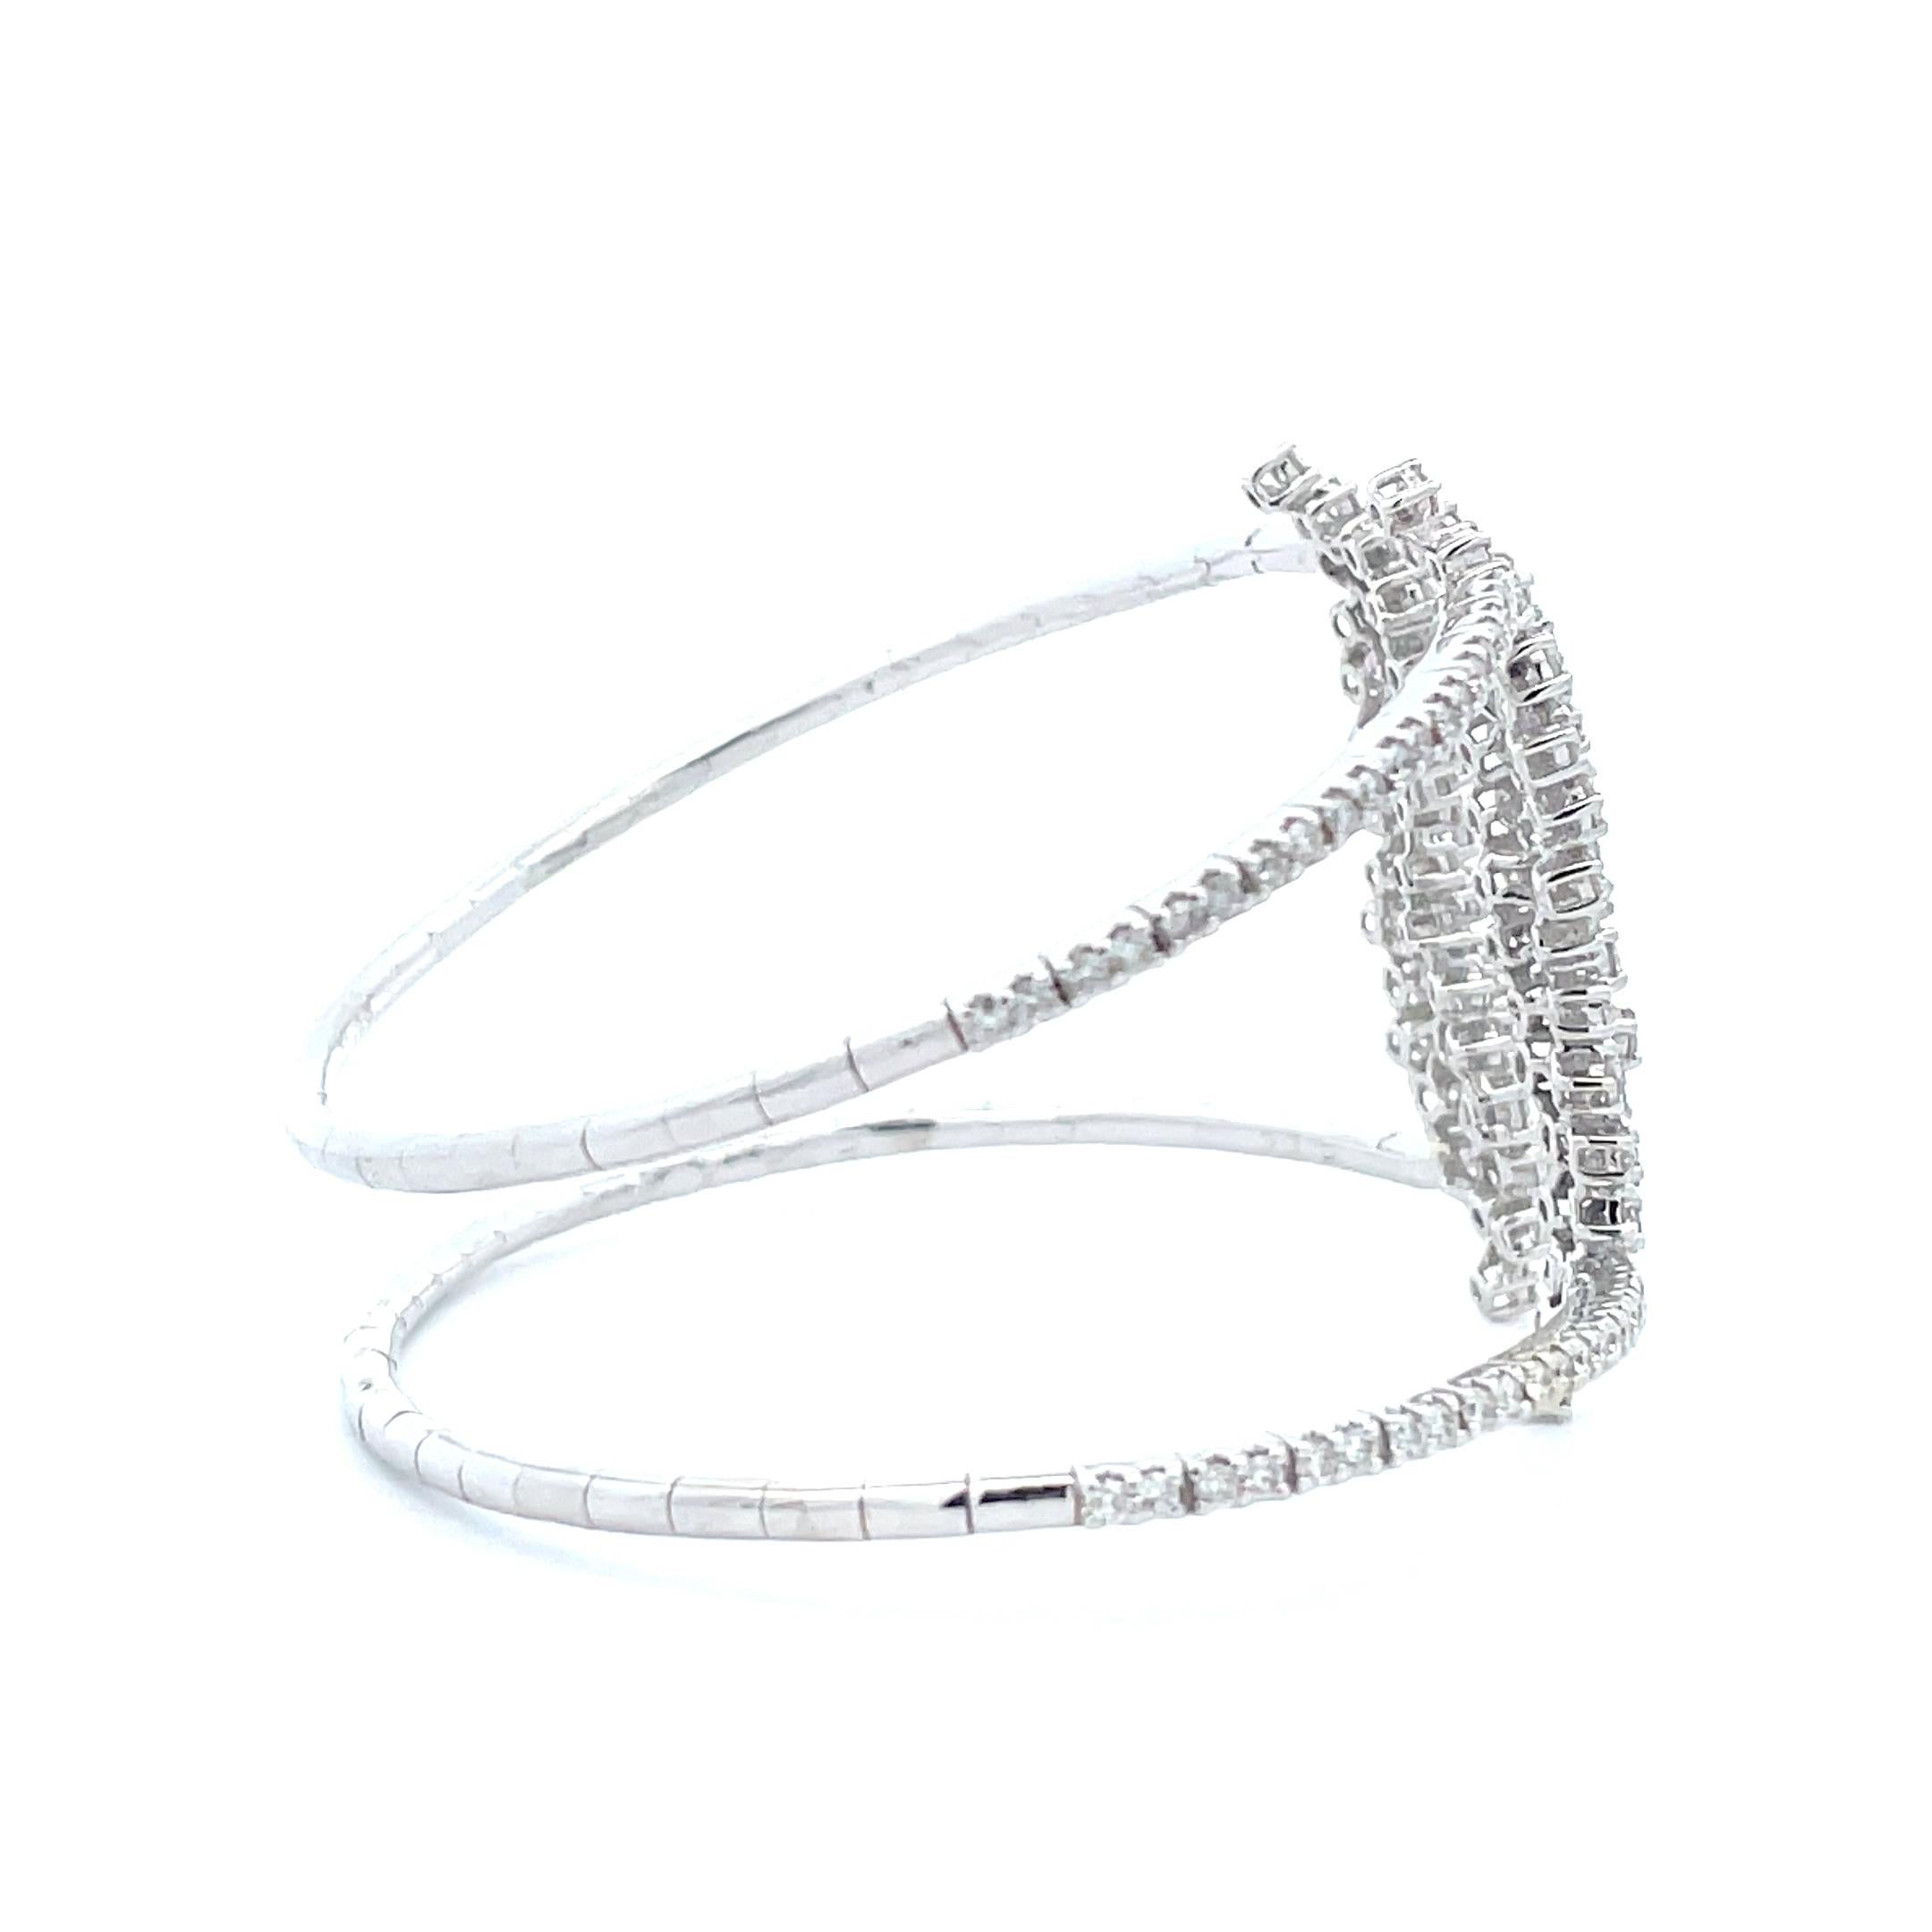 Discover the brilliance of the 3.27 ct. Diamond Cluster Double Band Cuff Bangle. Exquisite craftsmanship, unmatched quality and a classic design that exudes refined luxury are hallmarks of this exquisite design. The classic double- band cuff bangle